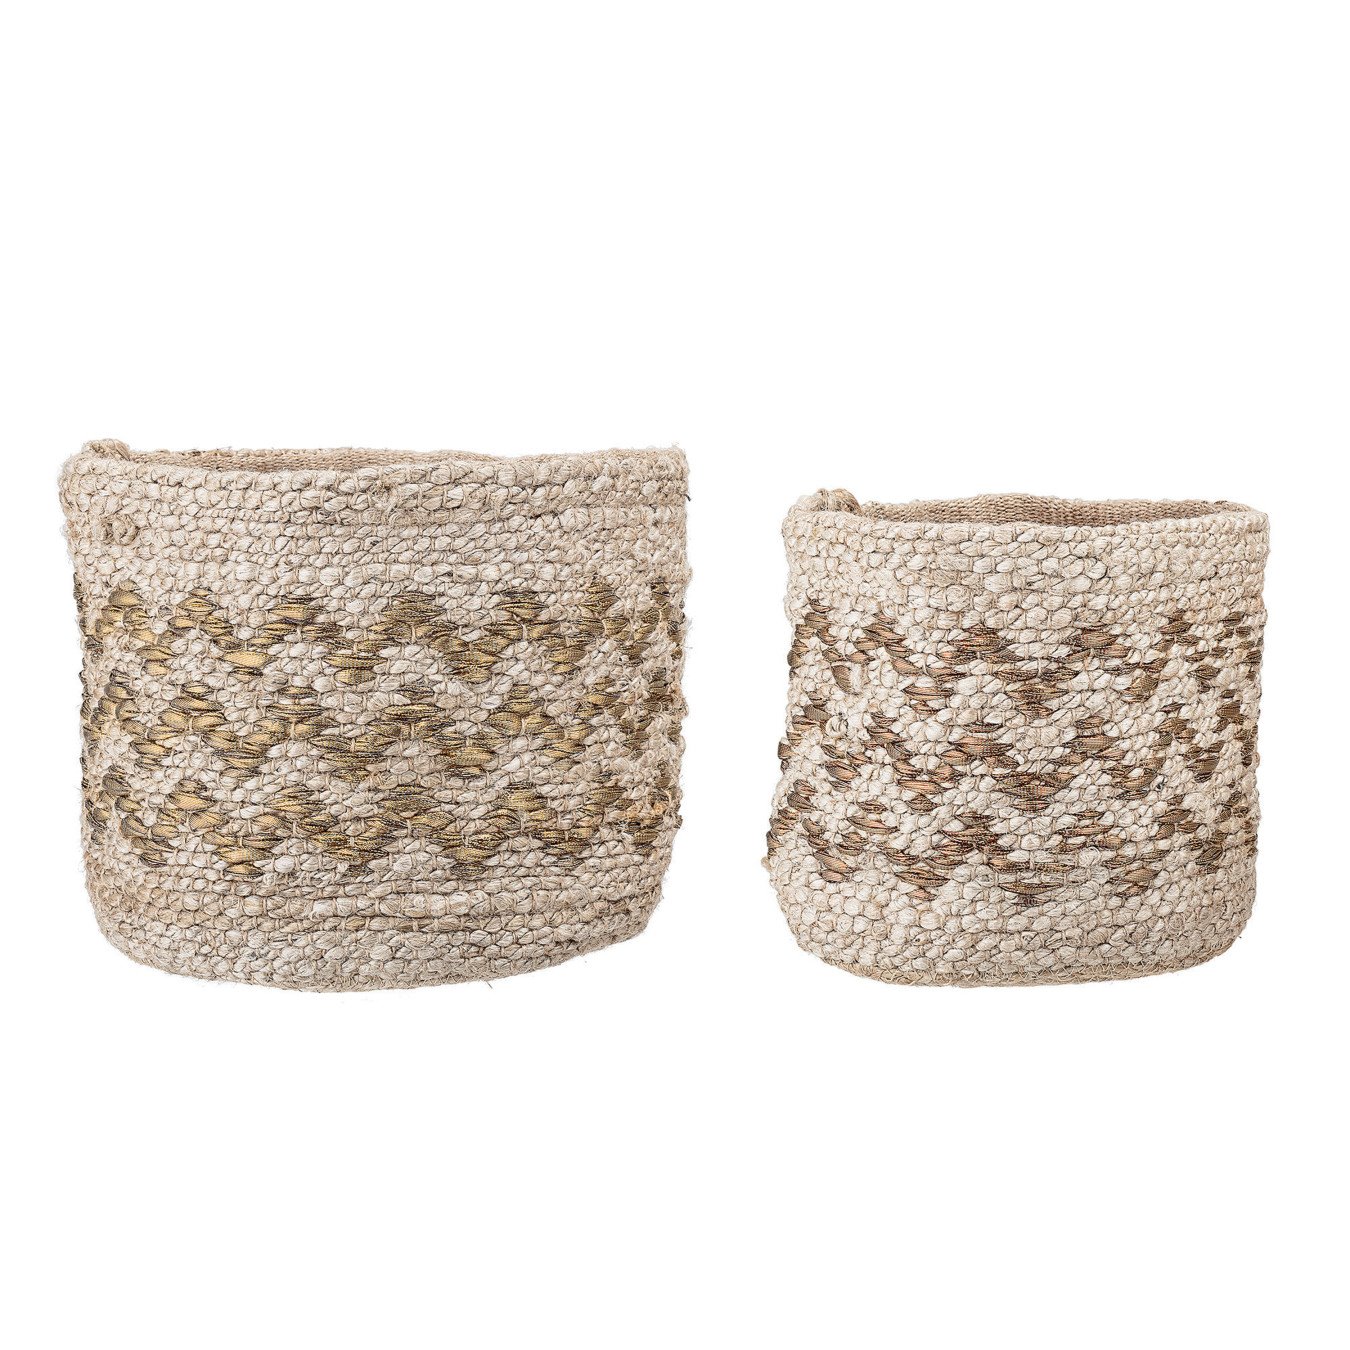 Hand Braided Jute Baskets with Gold Chevron Pattern (Set of 2 Sizes)